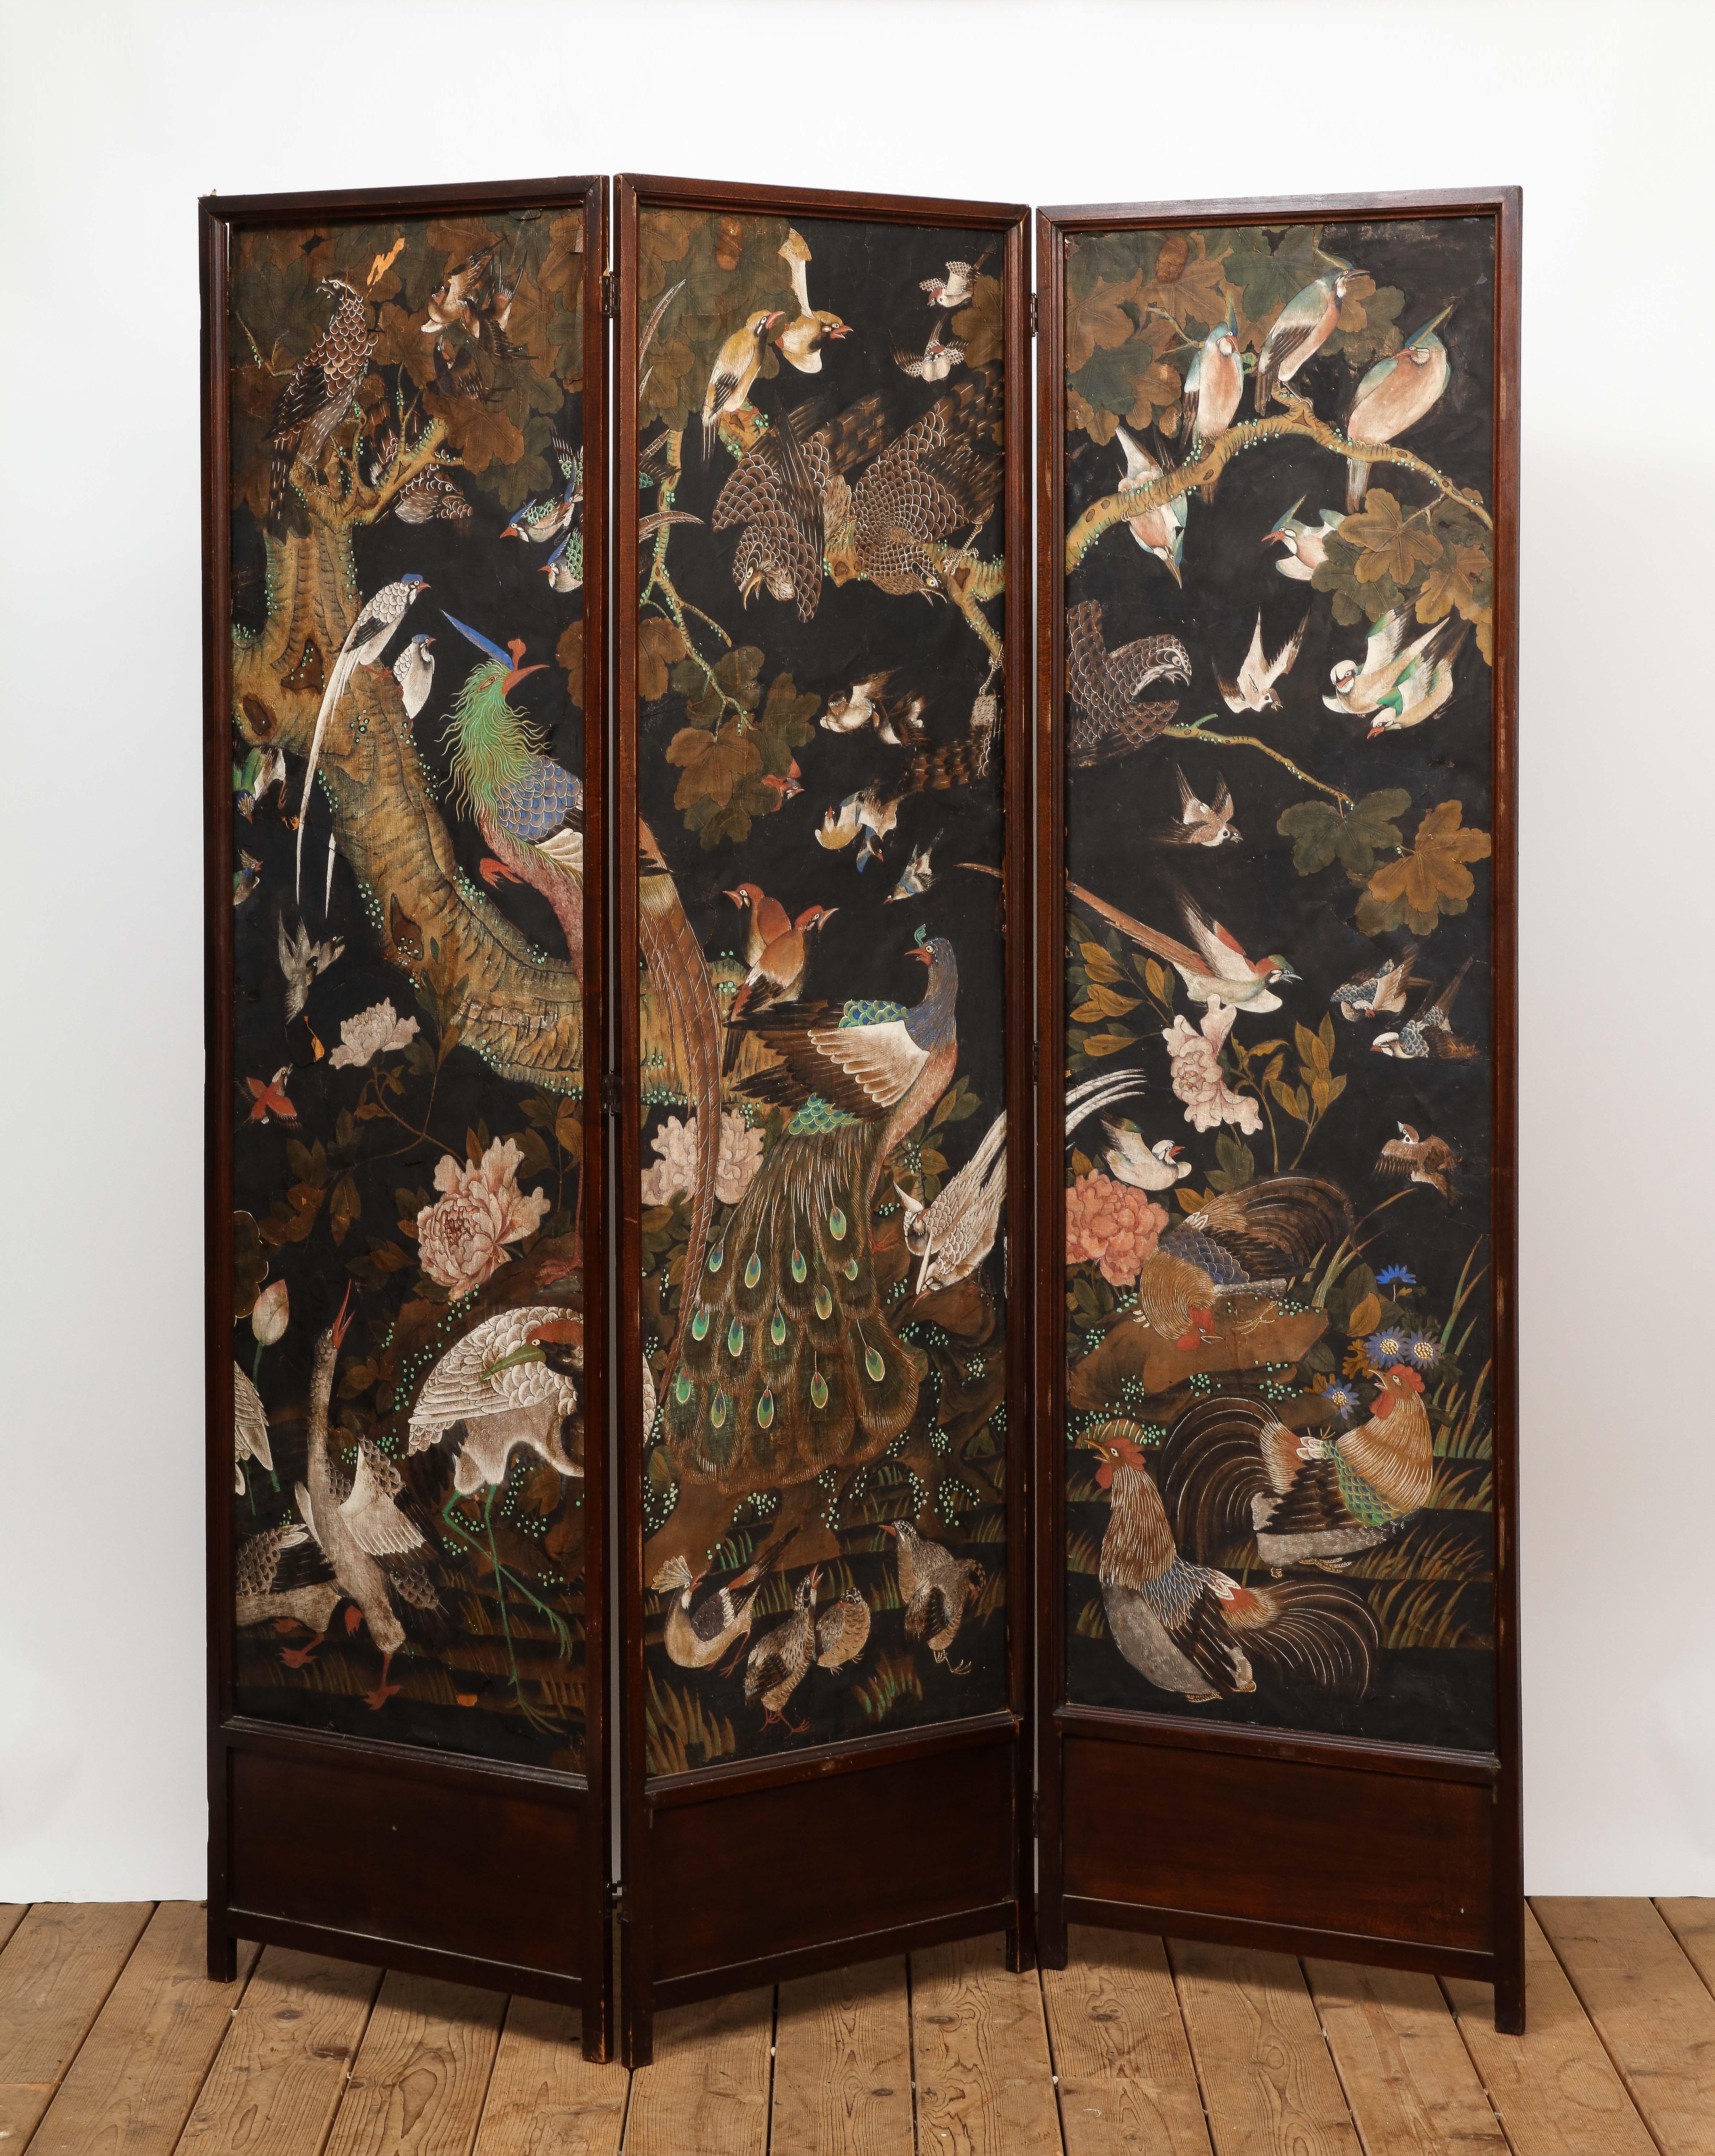 Vintage French three-panel folding screen featuring DeGournay hand-painted scenic wallpaper depicting various birds, including a central peacock, hens, swallows and hawks. The wood frame needs some restoration, the paper has small tears and